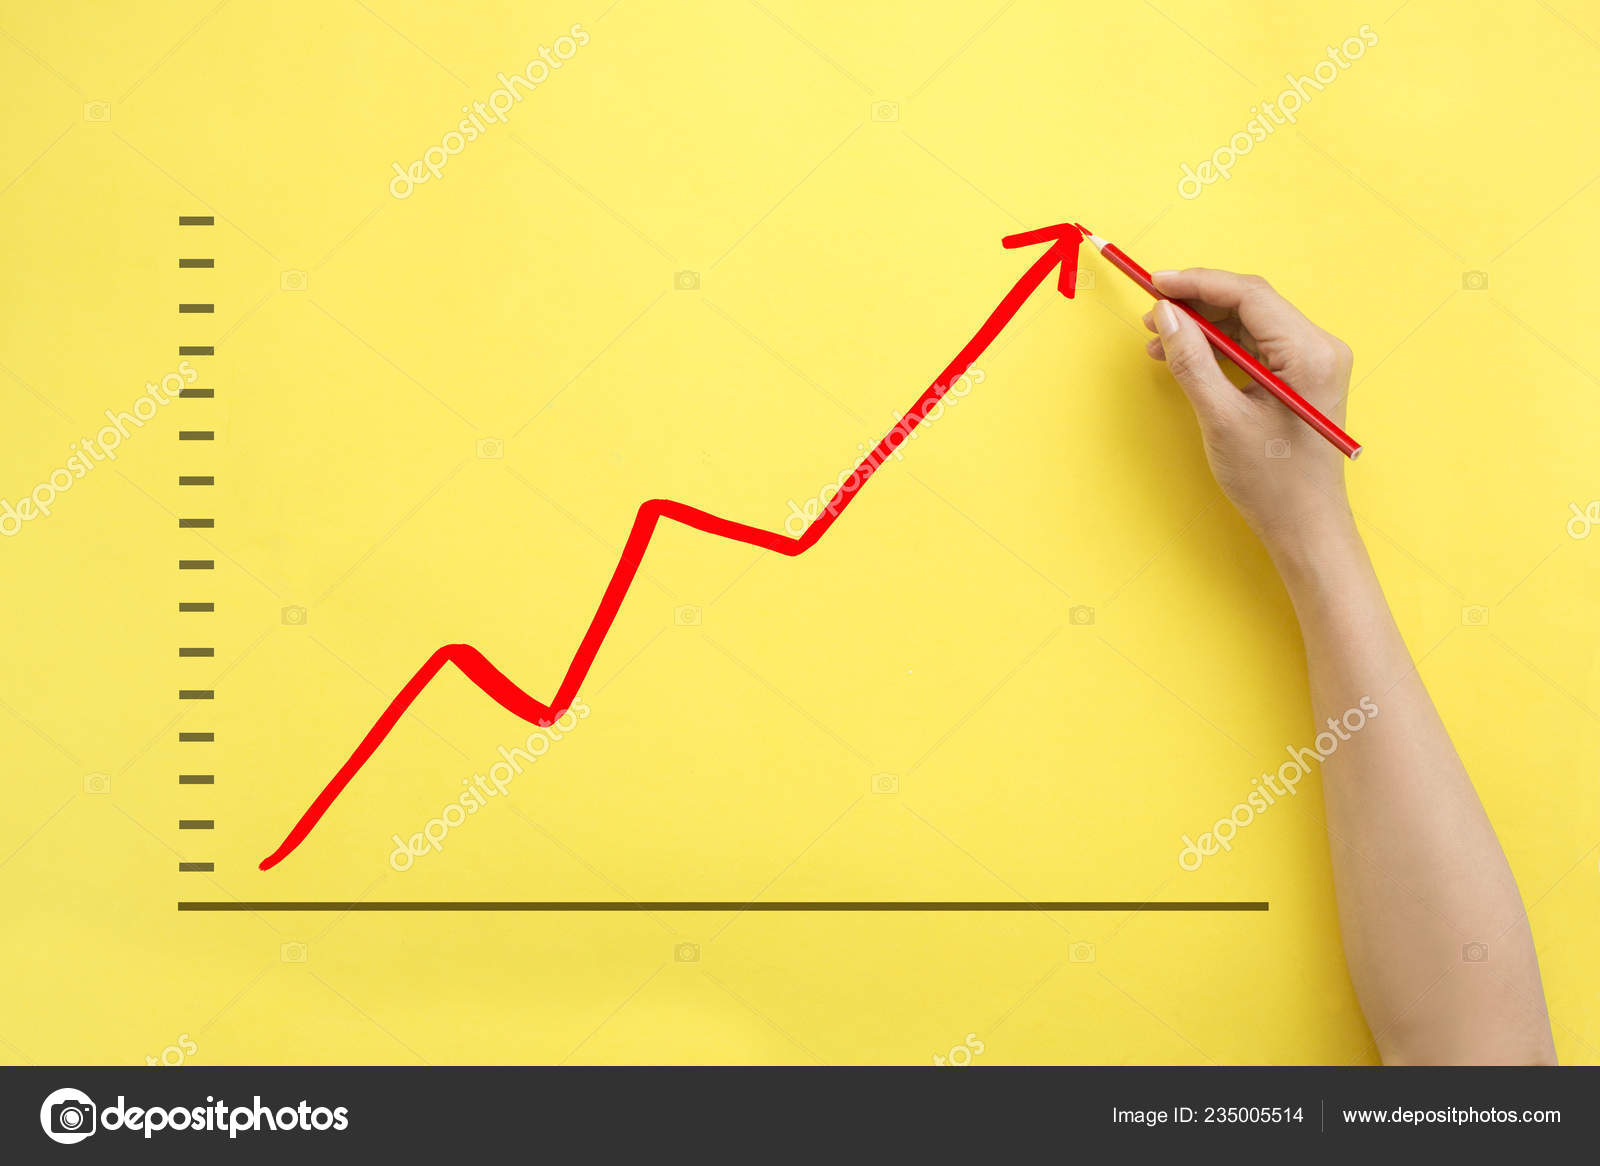 Business Growth Chart Images